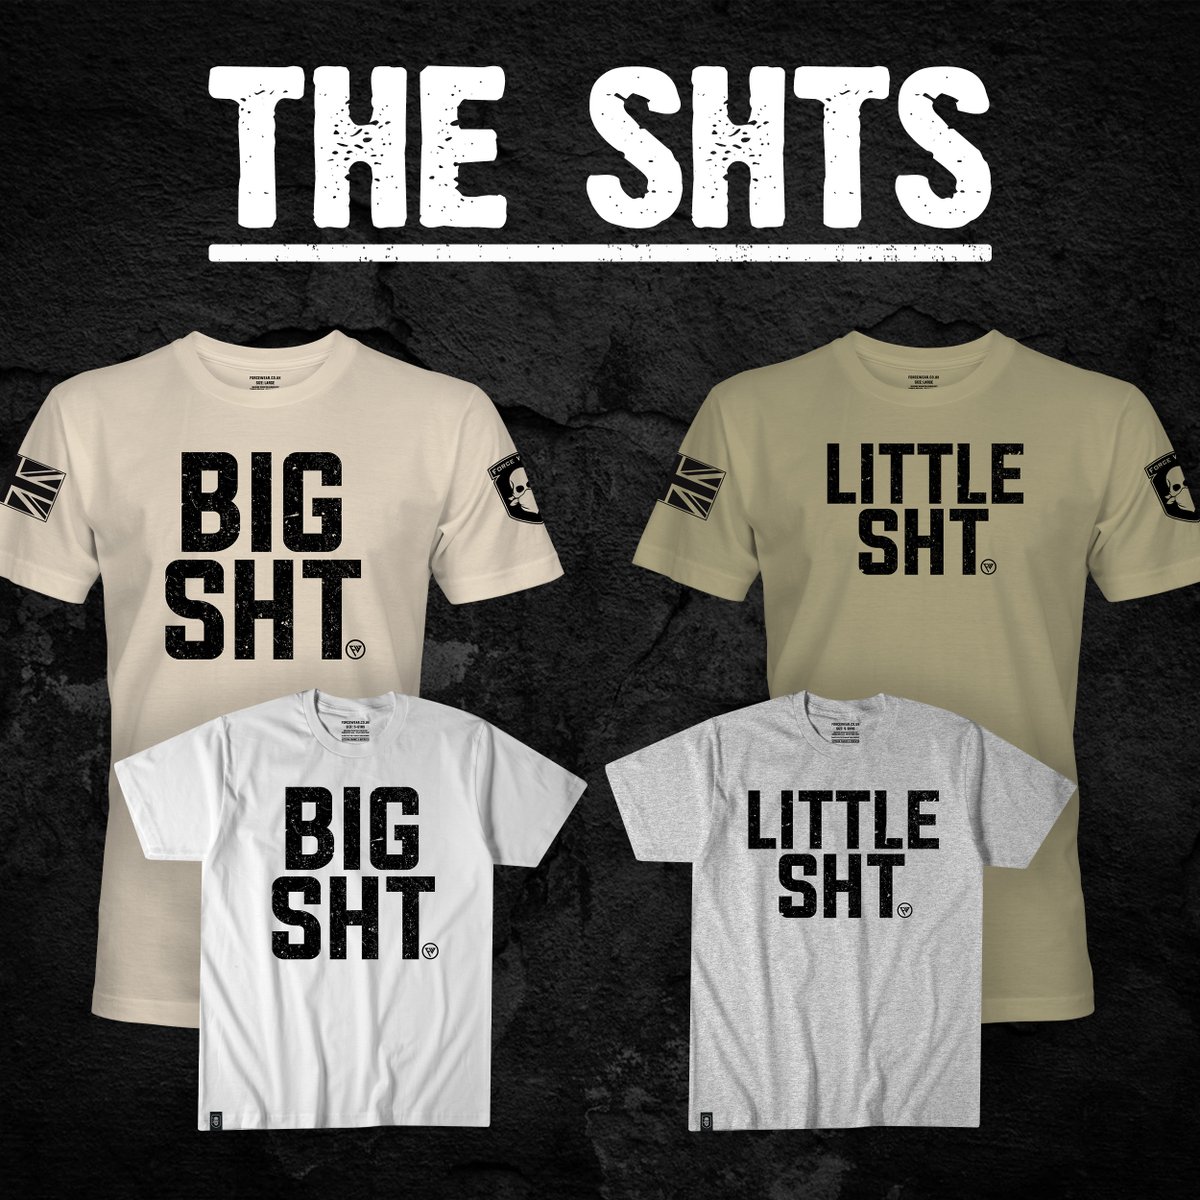 Get the clan involved in our new family collection 'The Shts'! Available now in adult and kid sizes. 😂

#britisharmy #militaryhumour #veteran #soldiers #armylife #cadets #emergencyresponders